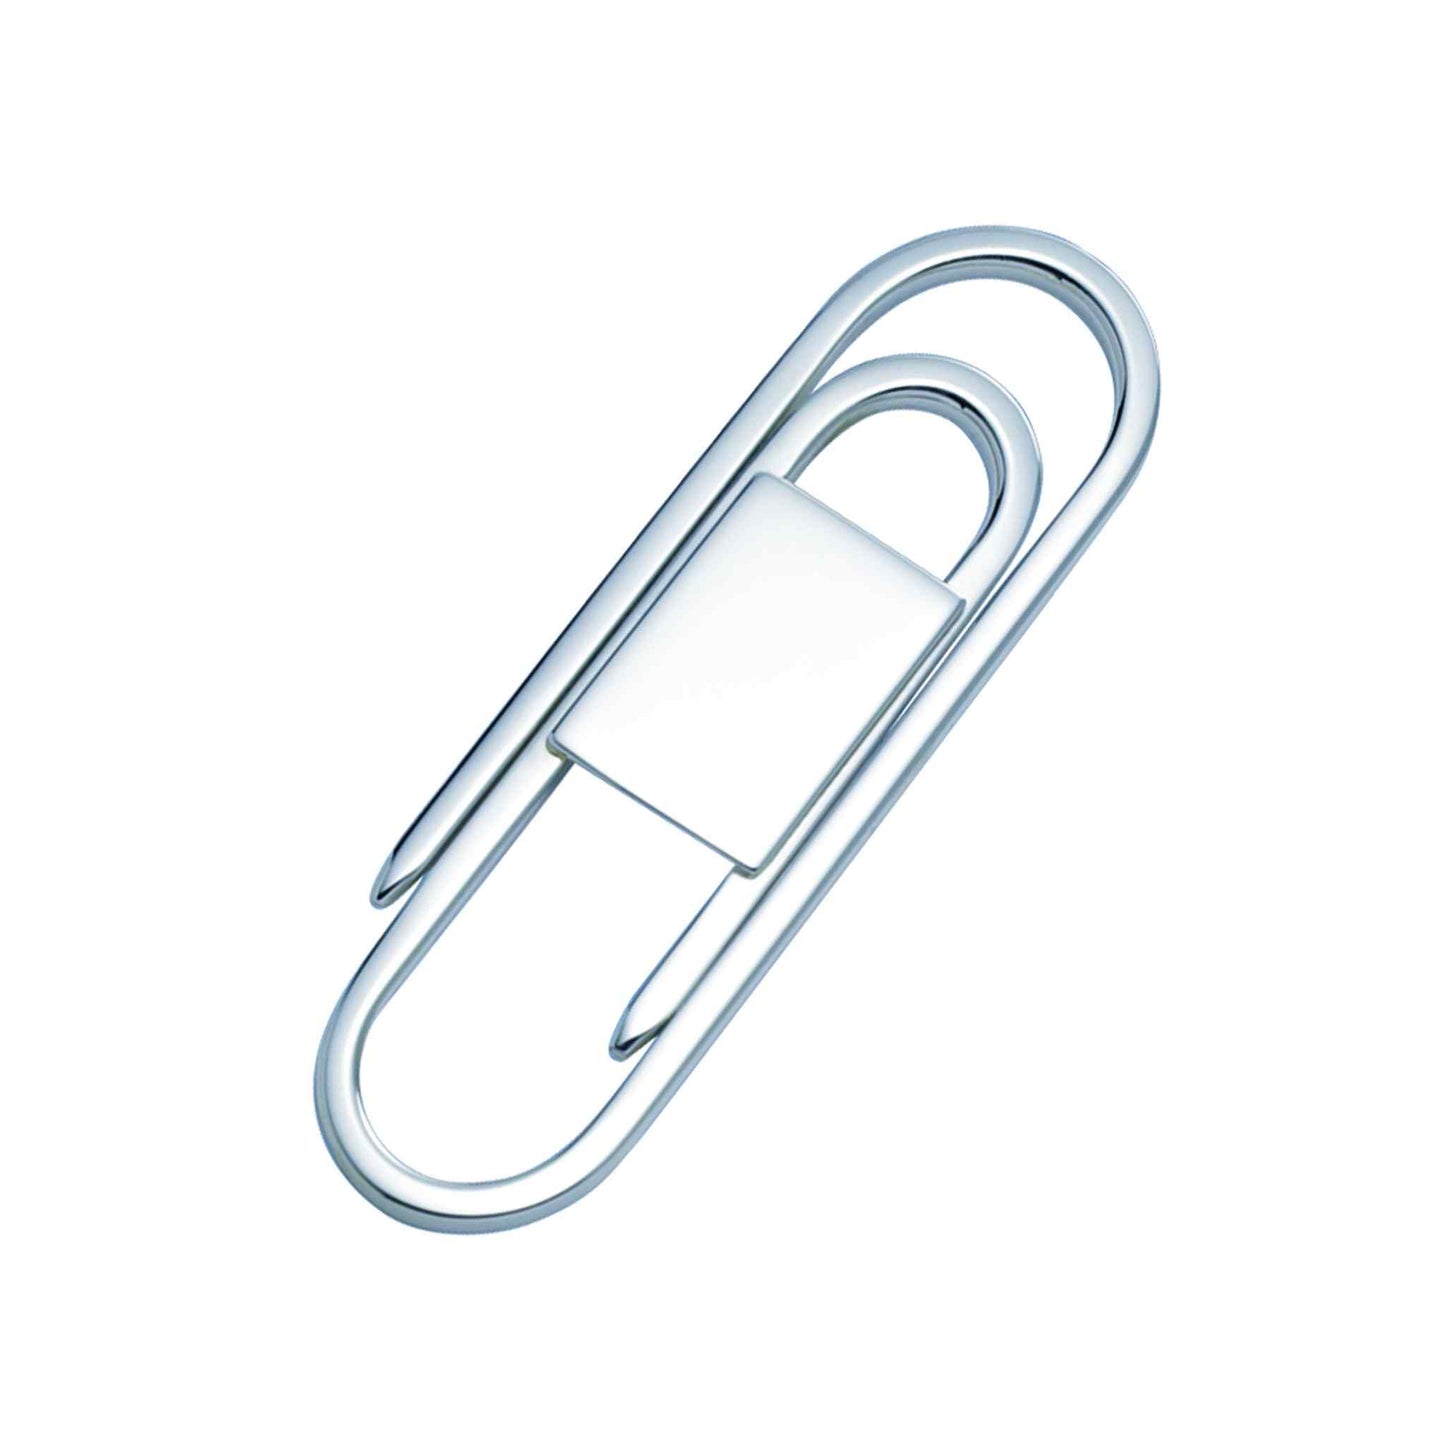 A paper clip money clip displayed on a neutral white background.